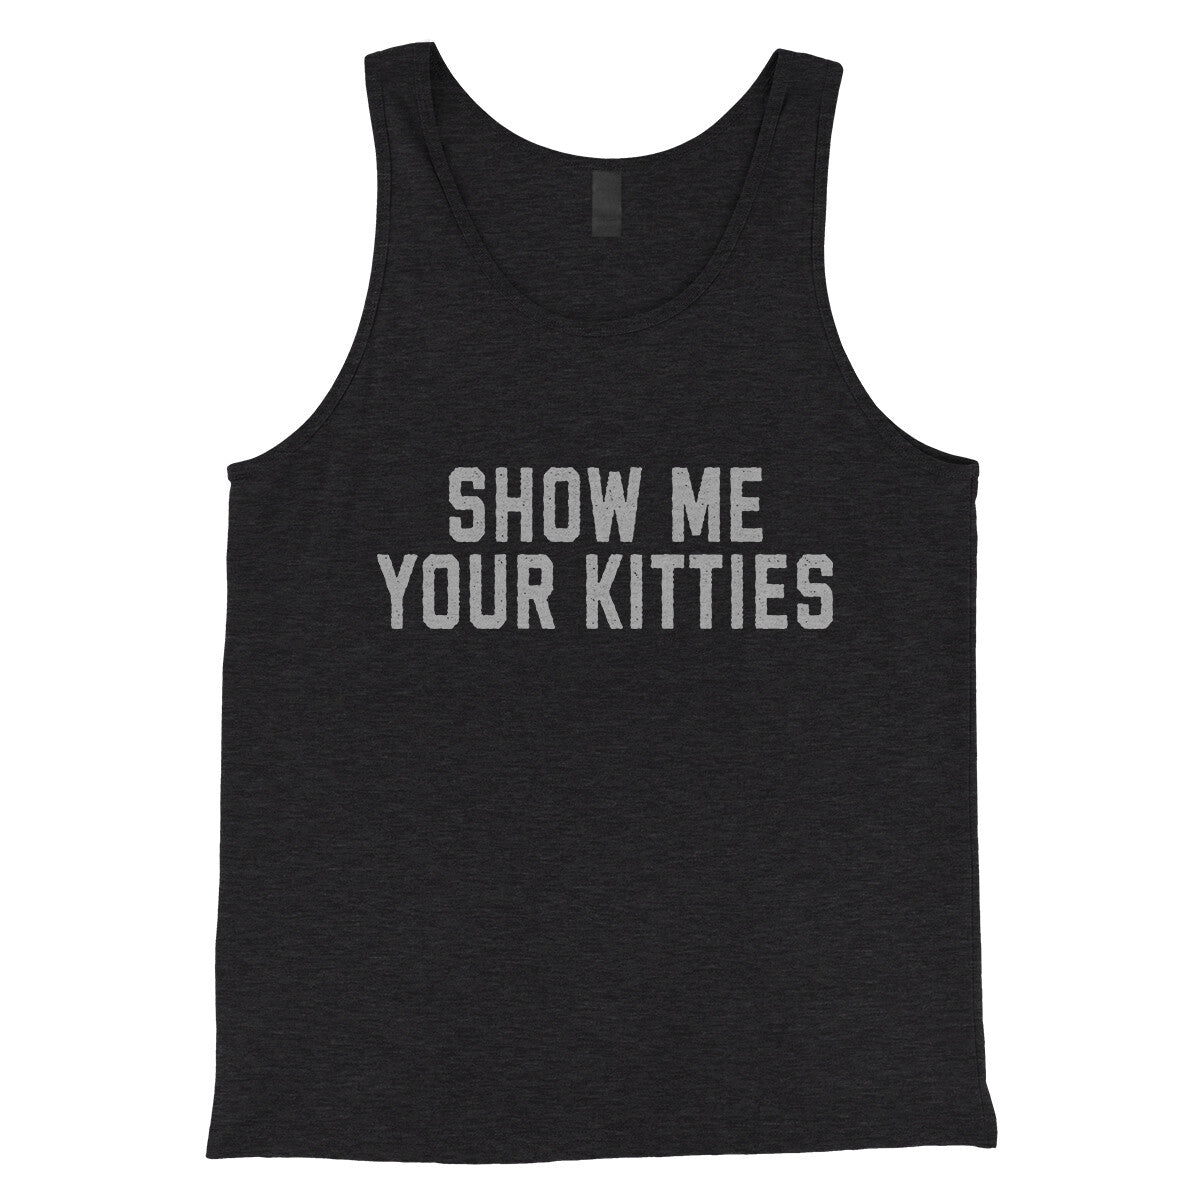 Show me Your Kitties in Charcoal Black TriBlend Color